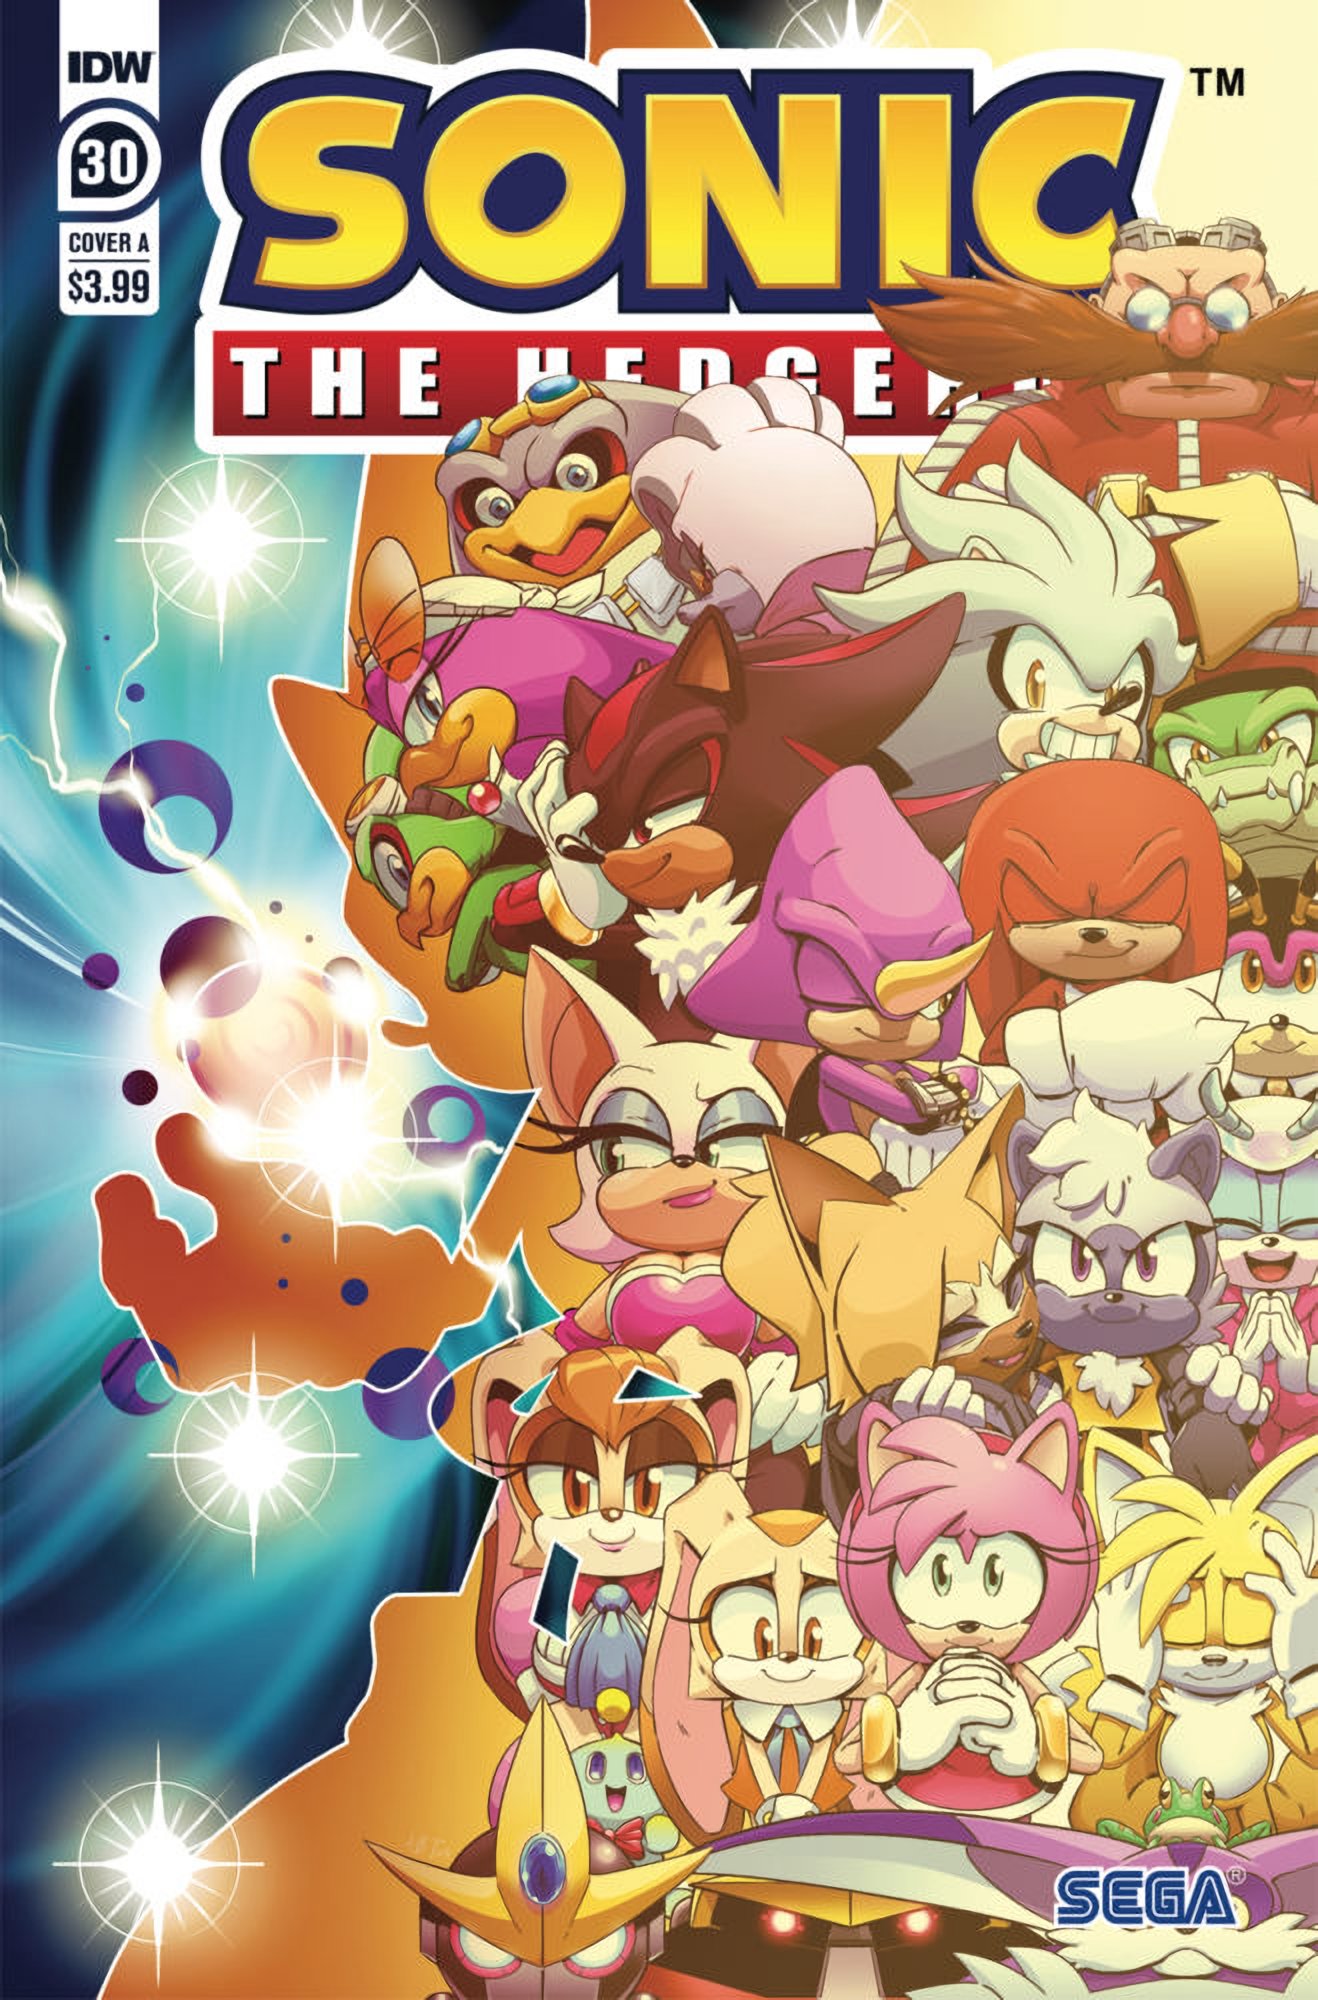 Idw Sonic Issue Covers Tails Channel